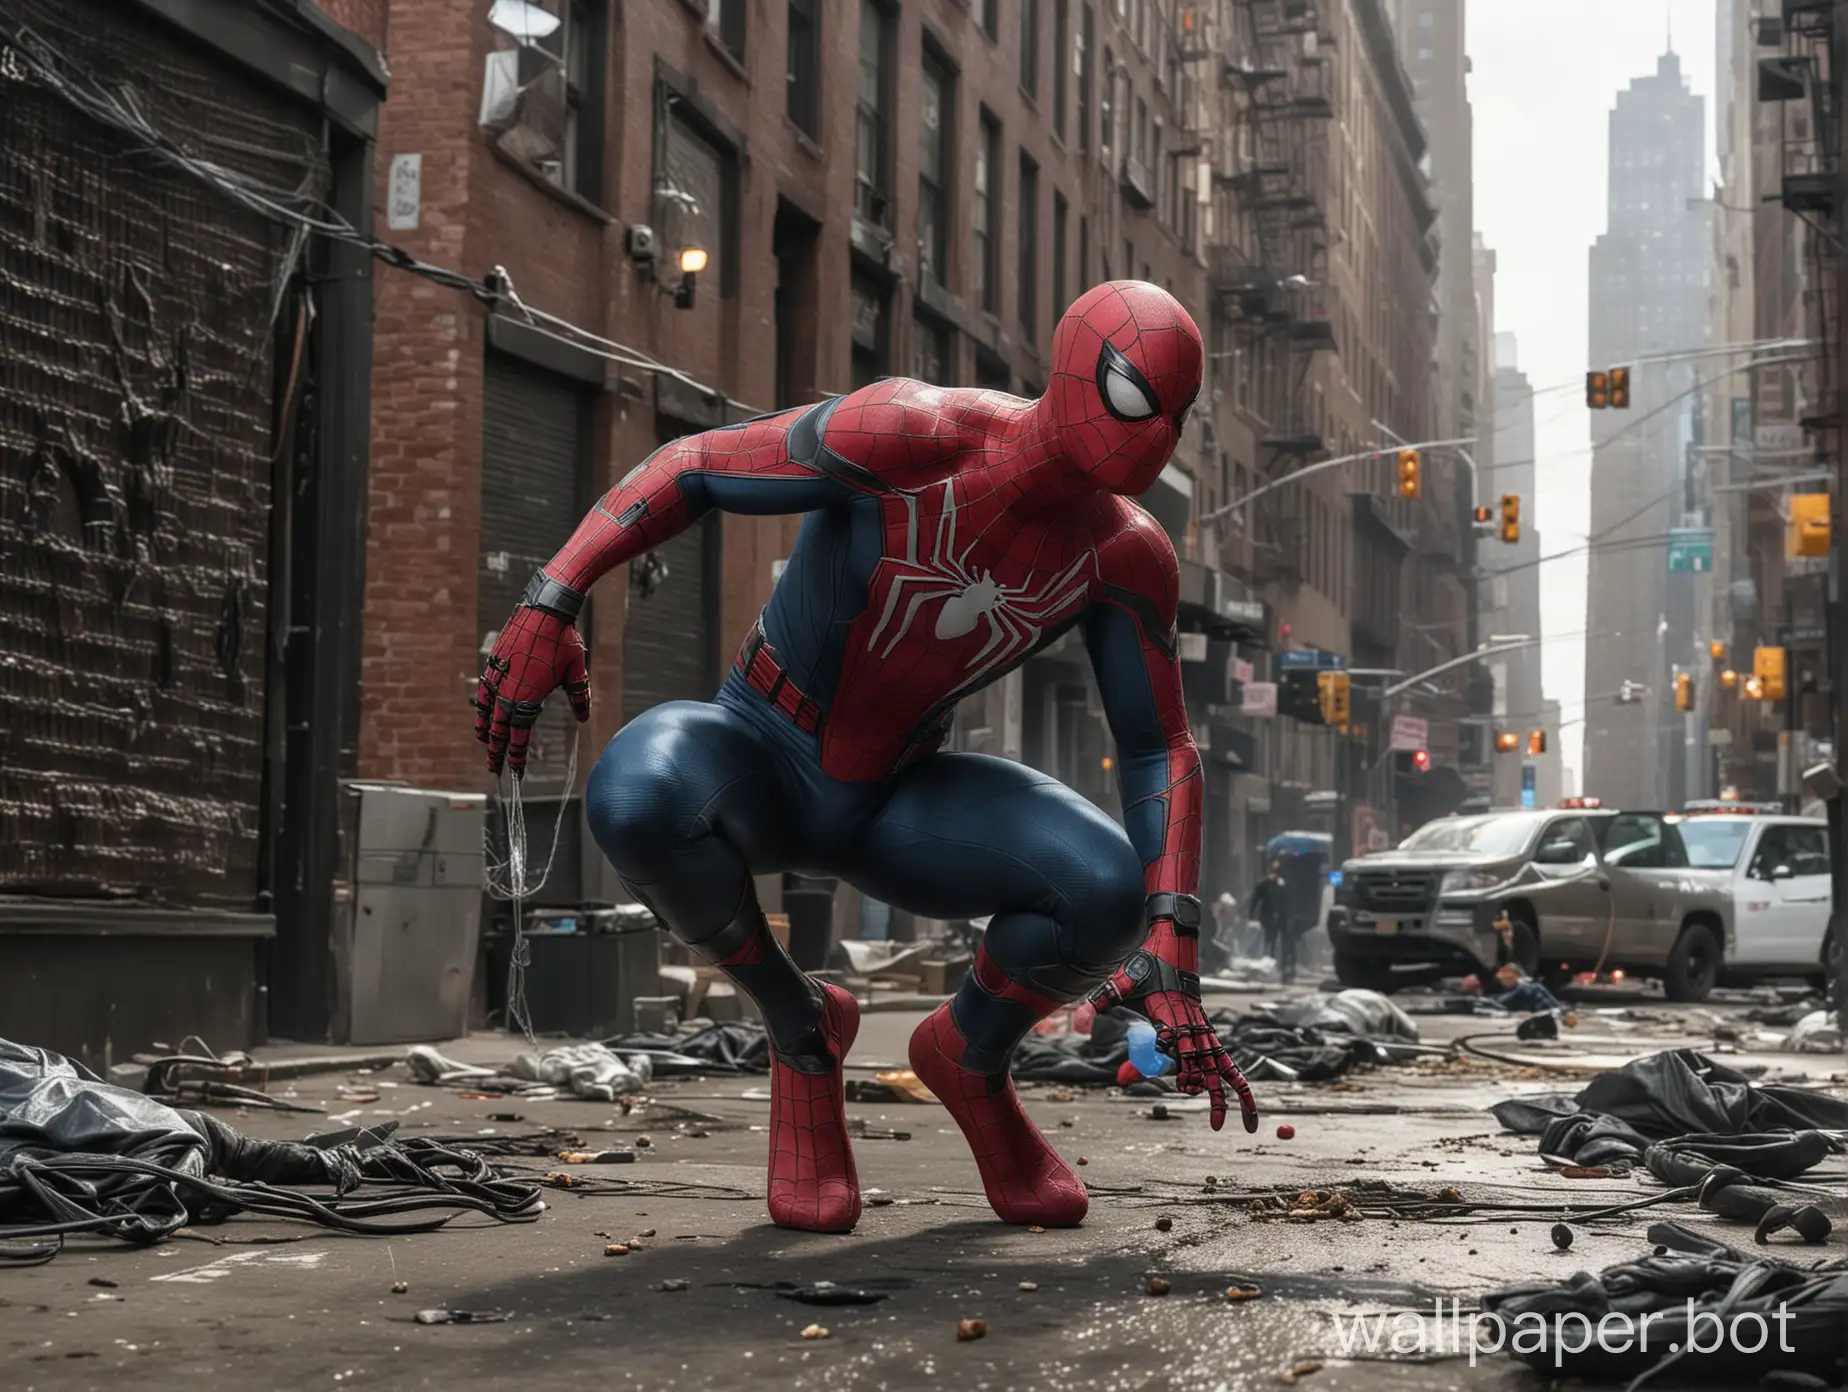 Spider-Man setting up containment devices around an infected area in New York City. The scene shows Spider-Man attaching high-tech gadgets to buildings and street corners, with black webbing and corrupted citizens in the background